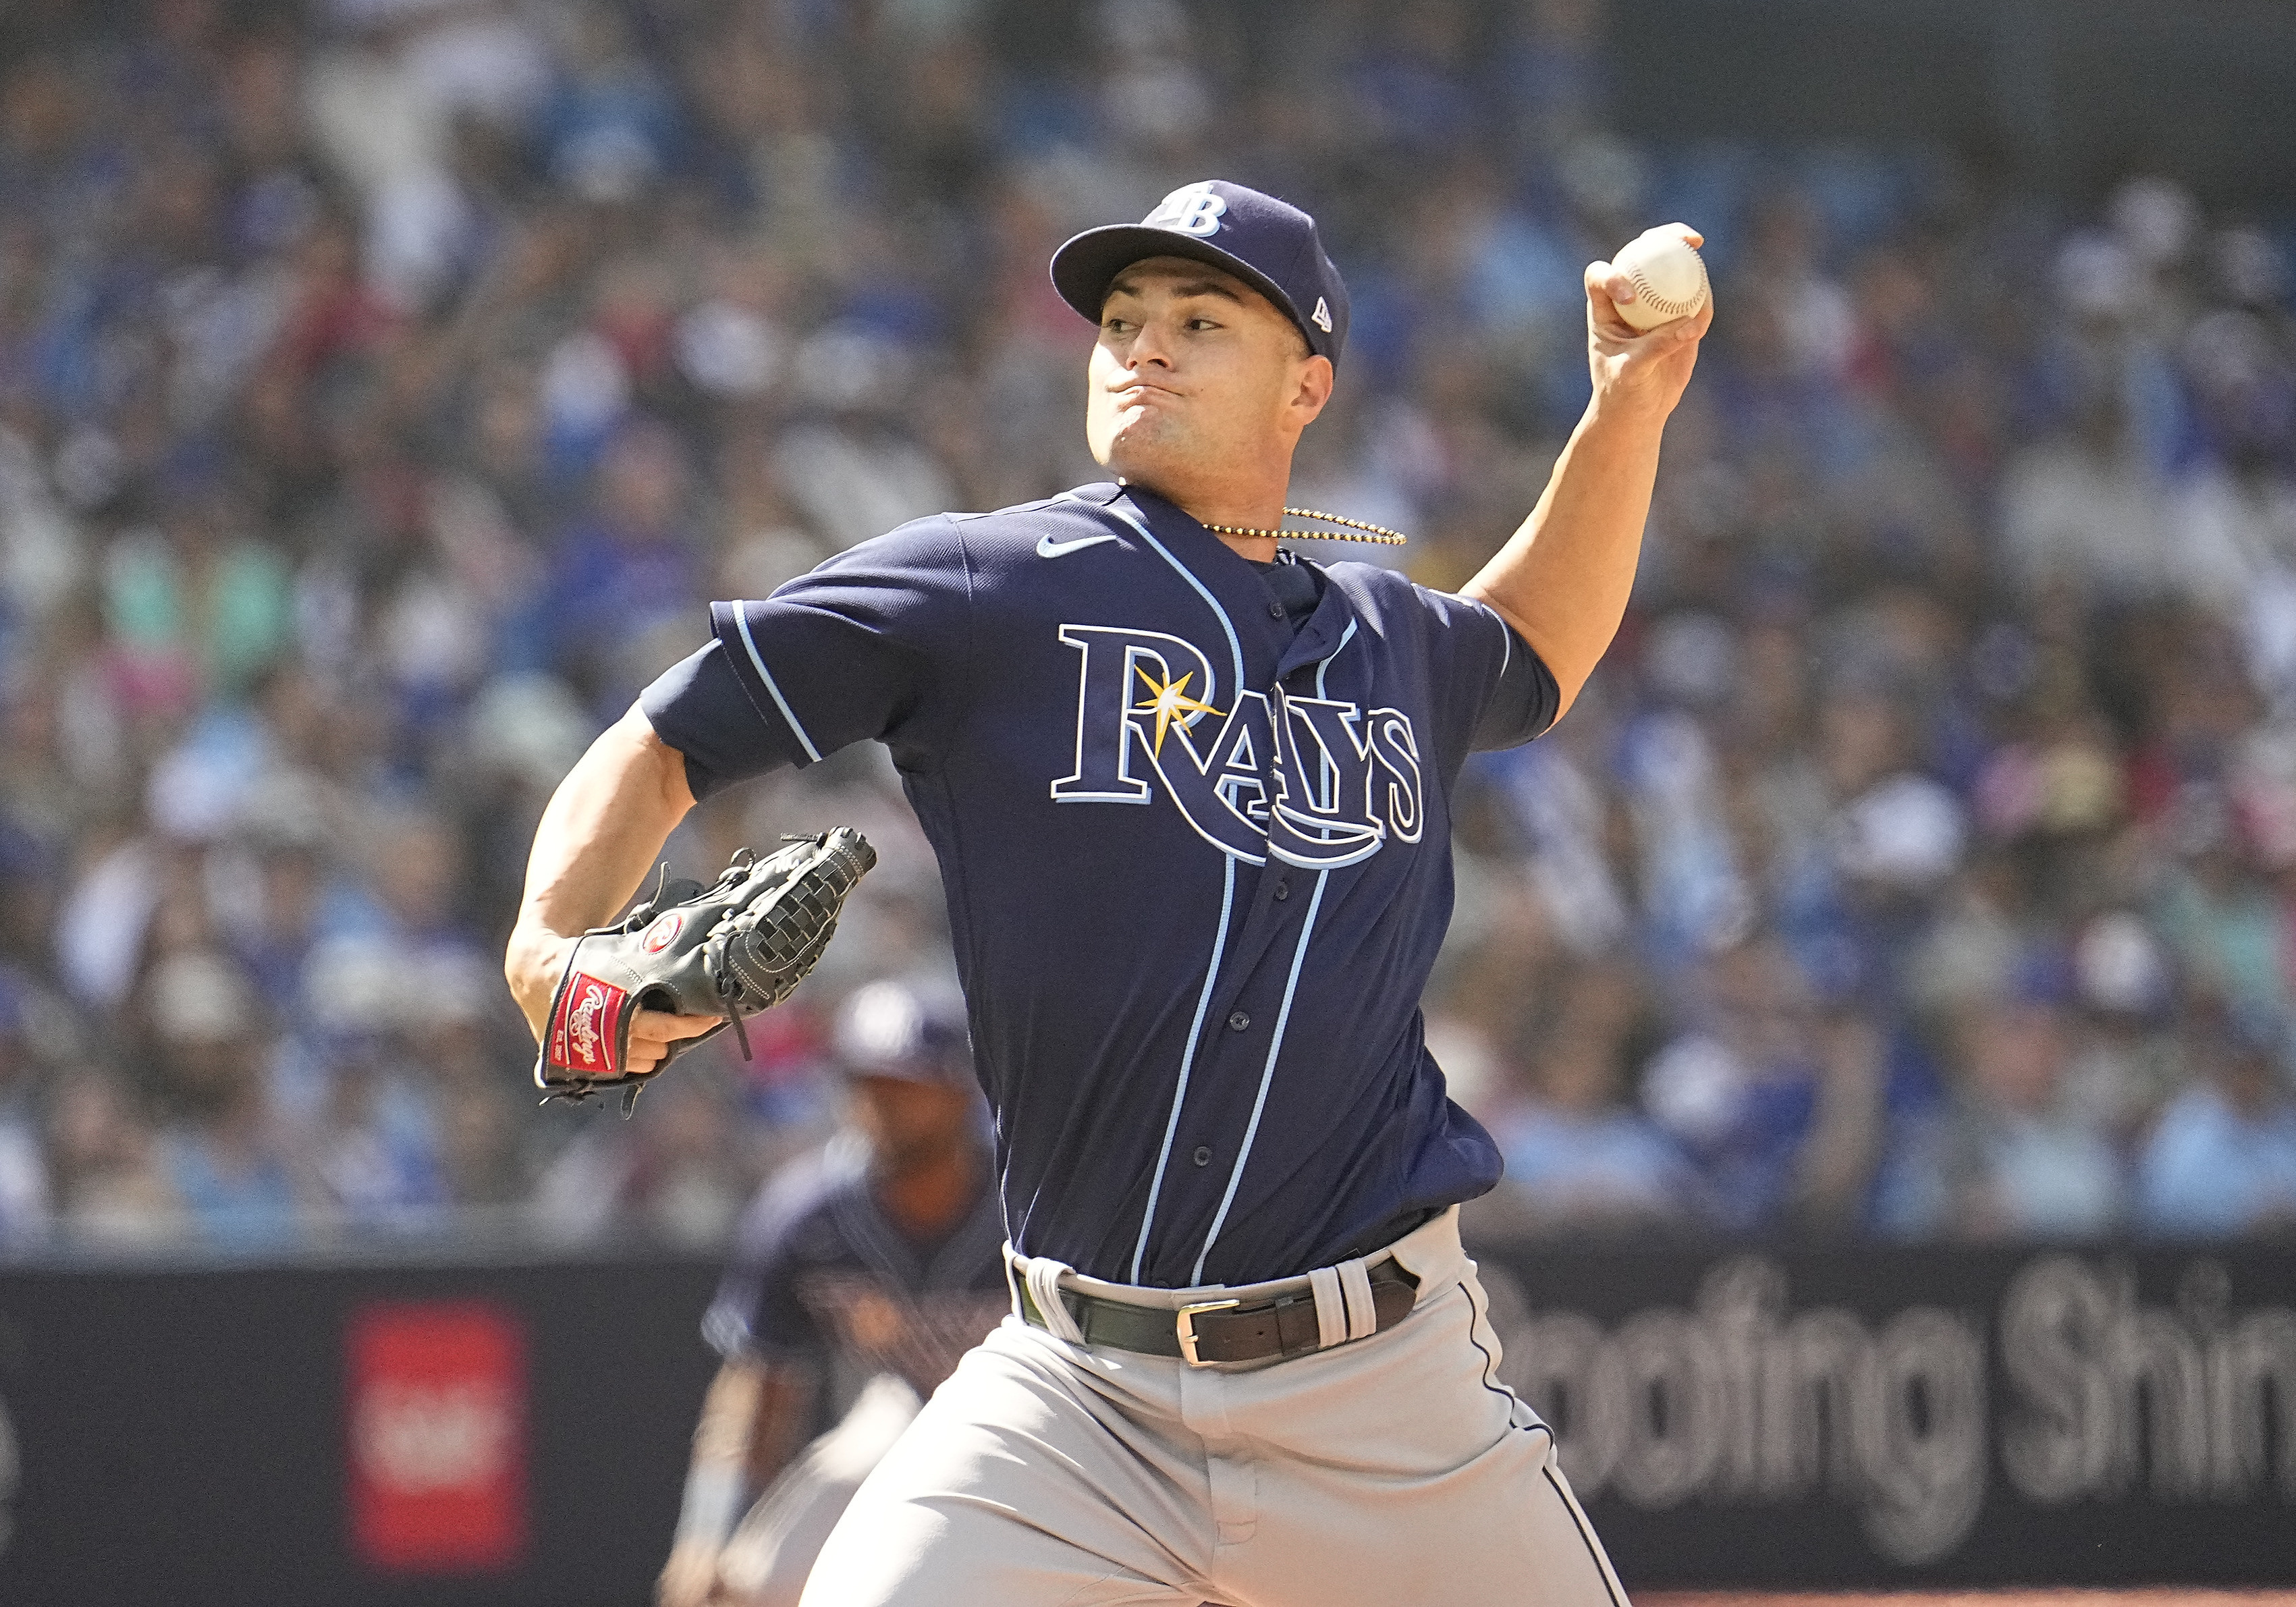 Shane McClanahan improves to 4-0 after helping Rays return to the